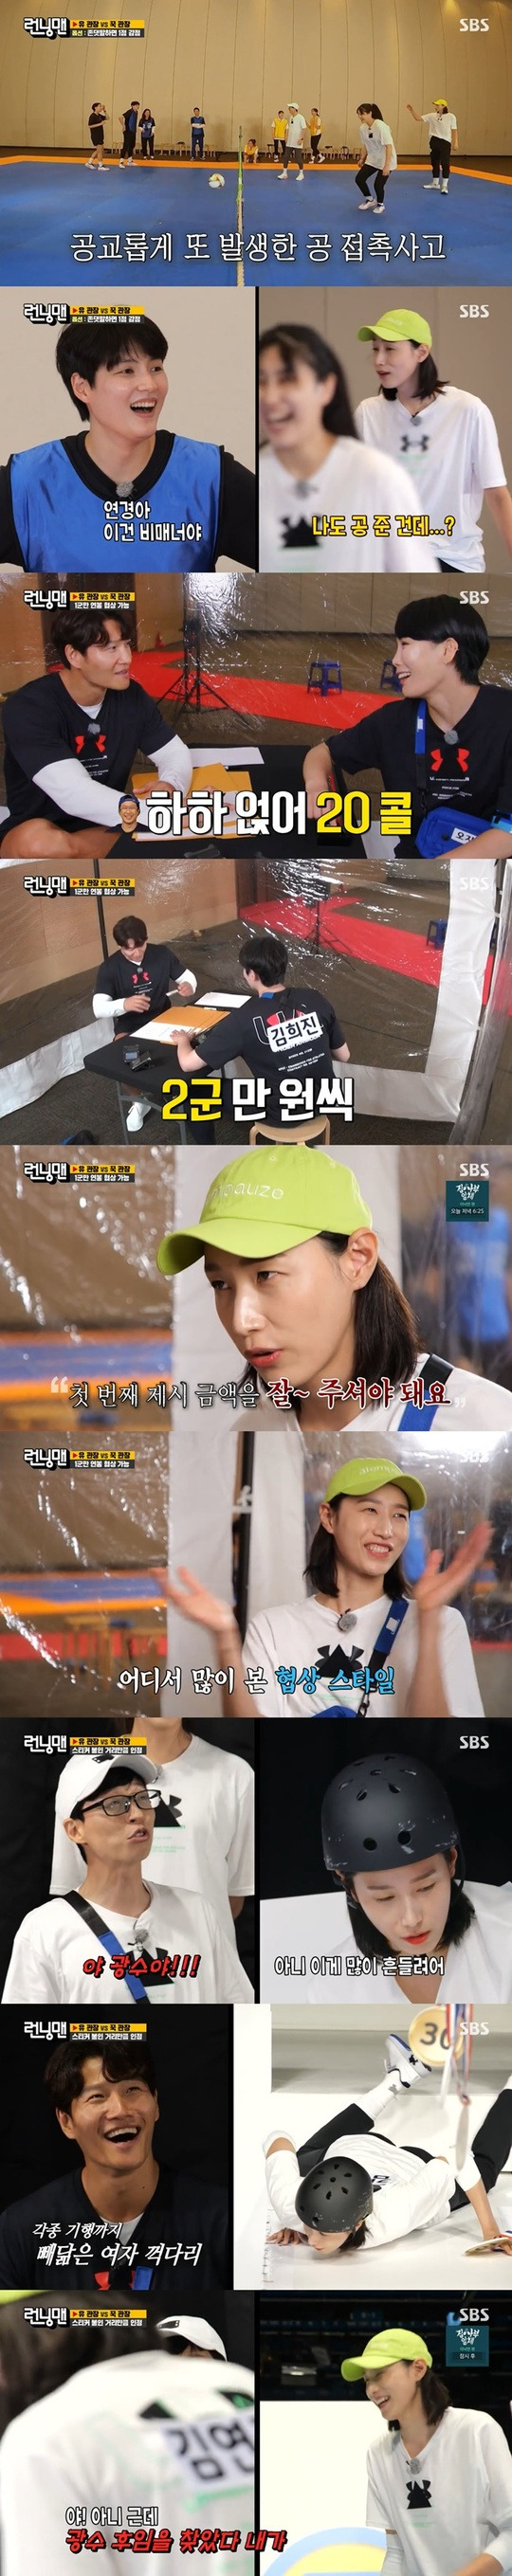 Kim Yeon-koung showed off her incredible sync rate with actor Lee Kwang-sooOn SBS Running Man broadcast on October 3, 2022 Running UEFA Champions League Newcomer Draft was decorated with the second round of the womens volleyball team Kim Yeon-koung, Kim Hee-jin, Oh Ji-young, Yeom Hye-sun, Park Eun-jin, Ahn Hye-jin and Lee So-young.The first option for the game was not to use honorific words after last week; Kim Yeon-koung began to fret after the same team, Yoo Jae-Suk, lost one after another.Kim Yeon-koung accidentally hit Kim Jong-kook team Kim Hee-jin during the serve, and Kim Hee-jin laughed and laughed, Yon Kyung-a is a non-manner.Eventually, the win went to the Kim Jong-kook team.The second option was to laugh and say and not be angry.Kim Yeon-koung, a bread sister, was named as a person of interest, but Kim Jong-kook team Ji Suk-jin eventually lost to the team with a series of irritation and runs.The footwear match was finished with 1:1, but the first game was x1.5 times as the first game, and Kim Jong-kook took the final victory.After the first game, the first team players salary negotiations were held.Kim Jong-kook team Oh Ji-young asked Kim Jong-kook to stay in Haha in the second group on condition that he accepts 200,000 One.Another Kim Jong-kook team Kim Hee-jin was also offered 200,000 One, but he showed a warm feeling of I will only receive 170,000 One, so give 10,000 One to the second team players.Kim Yeon-koung, who grasped the Kim Jong-kook team trend, told Yoo Jae-Suk director, You have to give me the first Jessie amount well.I have known how the other party treats it, he said. Kim Jong-kook received 300,000 One. Give me 300,000 One. Yoo Jae-Suk, who saw Kim Yeon-koungs shovel look, suspected, You are Lee Kwang-soo?Kim Yeon-koung did not lose, demanded 300,000 One, and Yoo Jae-Suk, who Jessie 140,000 One, said, How can I give you 300,000 One?Kim Yeon-koung said, Oh Ji-young received 30. You have to do as much as you have received. 140,000 One?Eventually, Yoo Jae-Suk Jessie 230,000 One, which Kim Yeon-koung accepted.The second round game was Am on the Next cliff - a rule that requires stickers to the farthest of places until the Styrofoam bridge breaks.Kim Yeon-koung, who came out as a team runner for Yoo Jae-Suk, was embarrassed by the styrofoam bridge height.Kim Yeon-koung, who was lying on the floor, was struggling without having to control his long legs.The members of Running Man who saw this were responding such as It is a photon expression, Lee Kwang-soo and Brook.